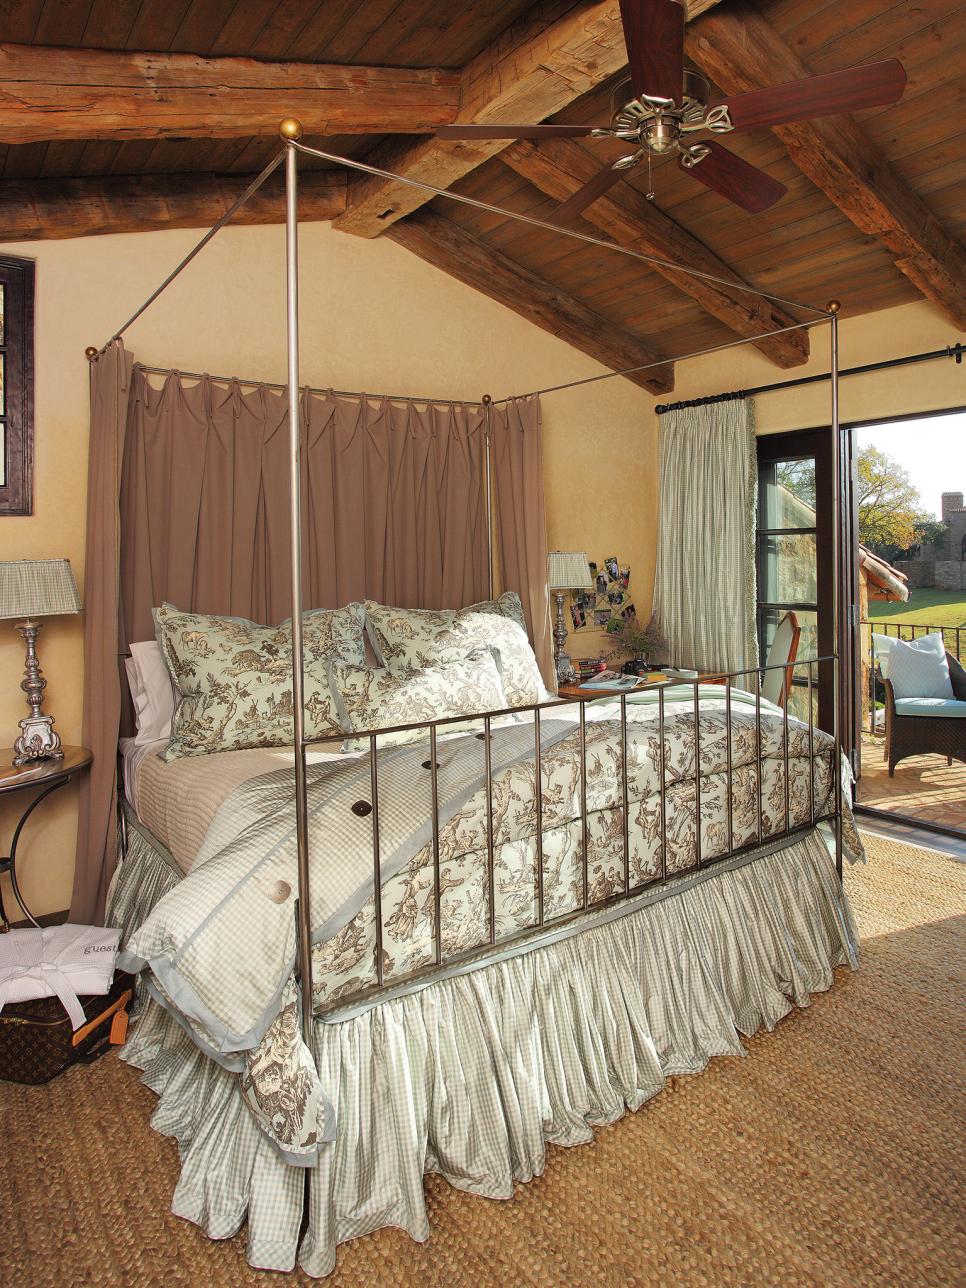 Rustic Bedroom With Outdoor Seating Area